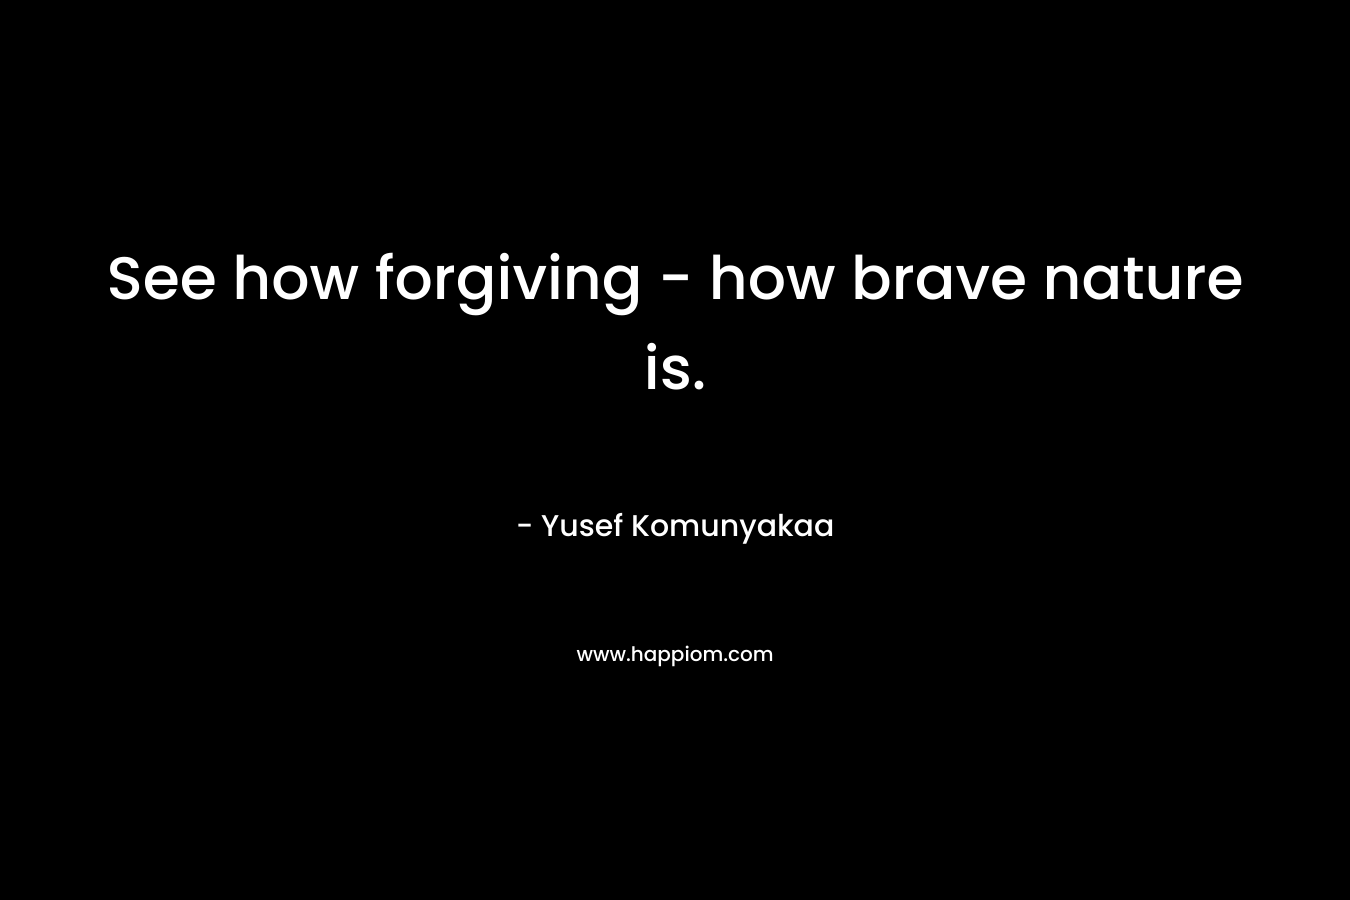 See how forgiving - how brave nature is.